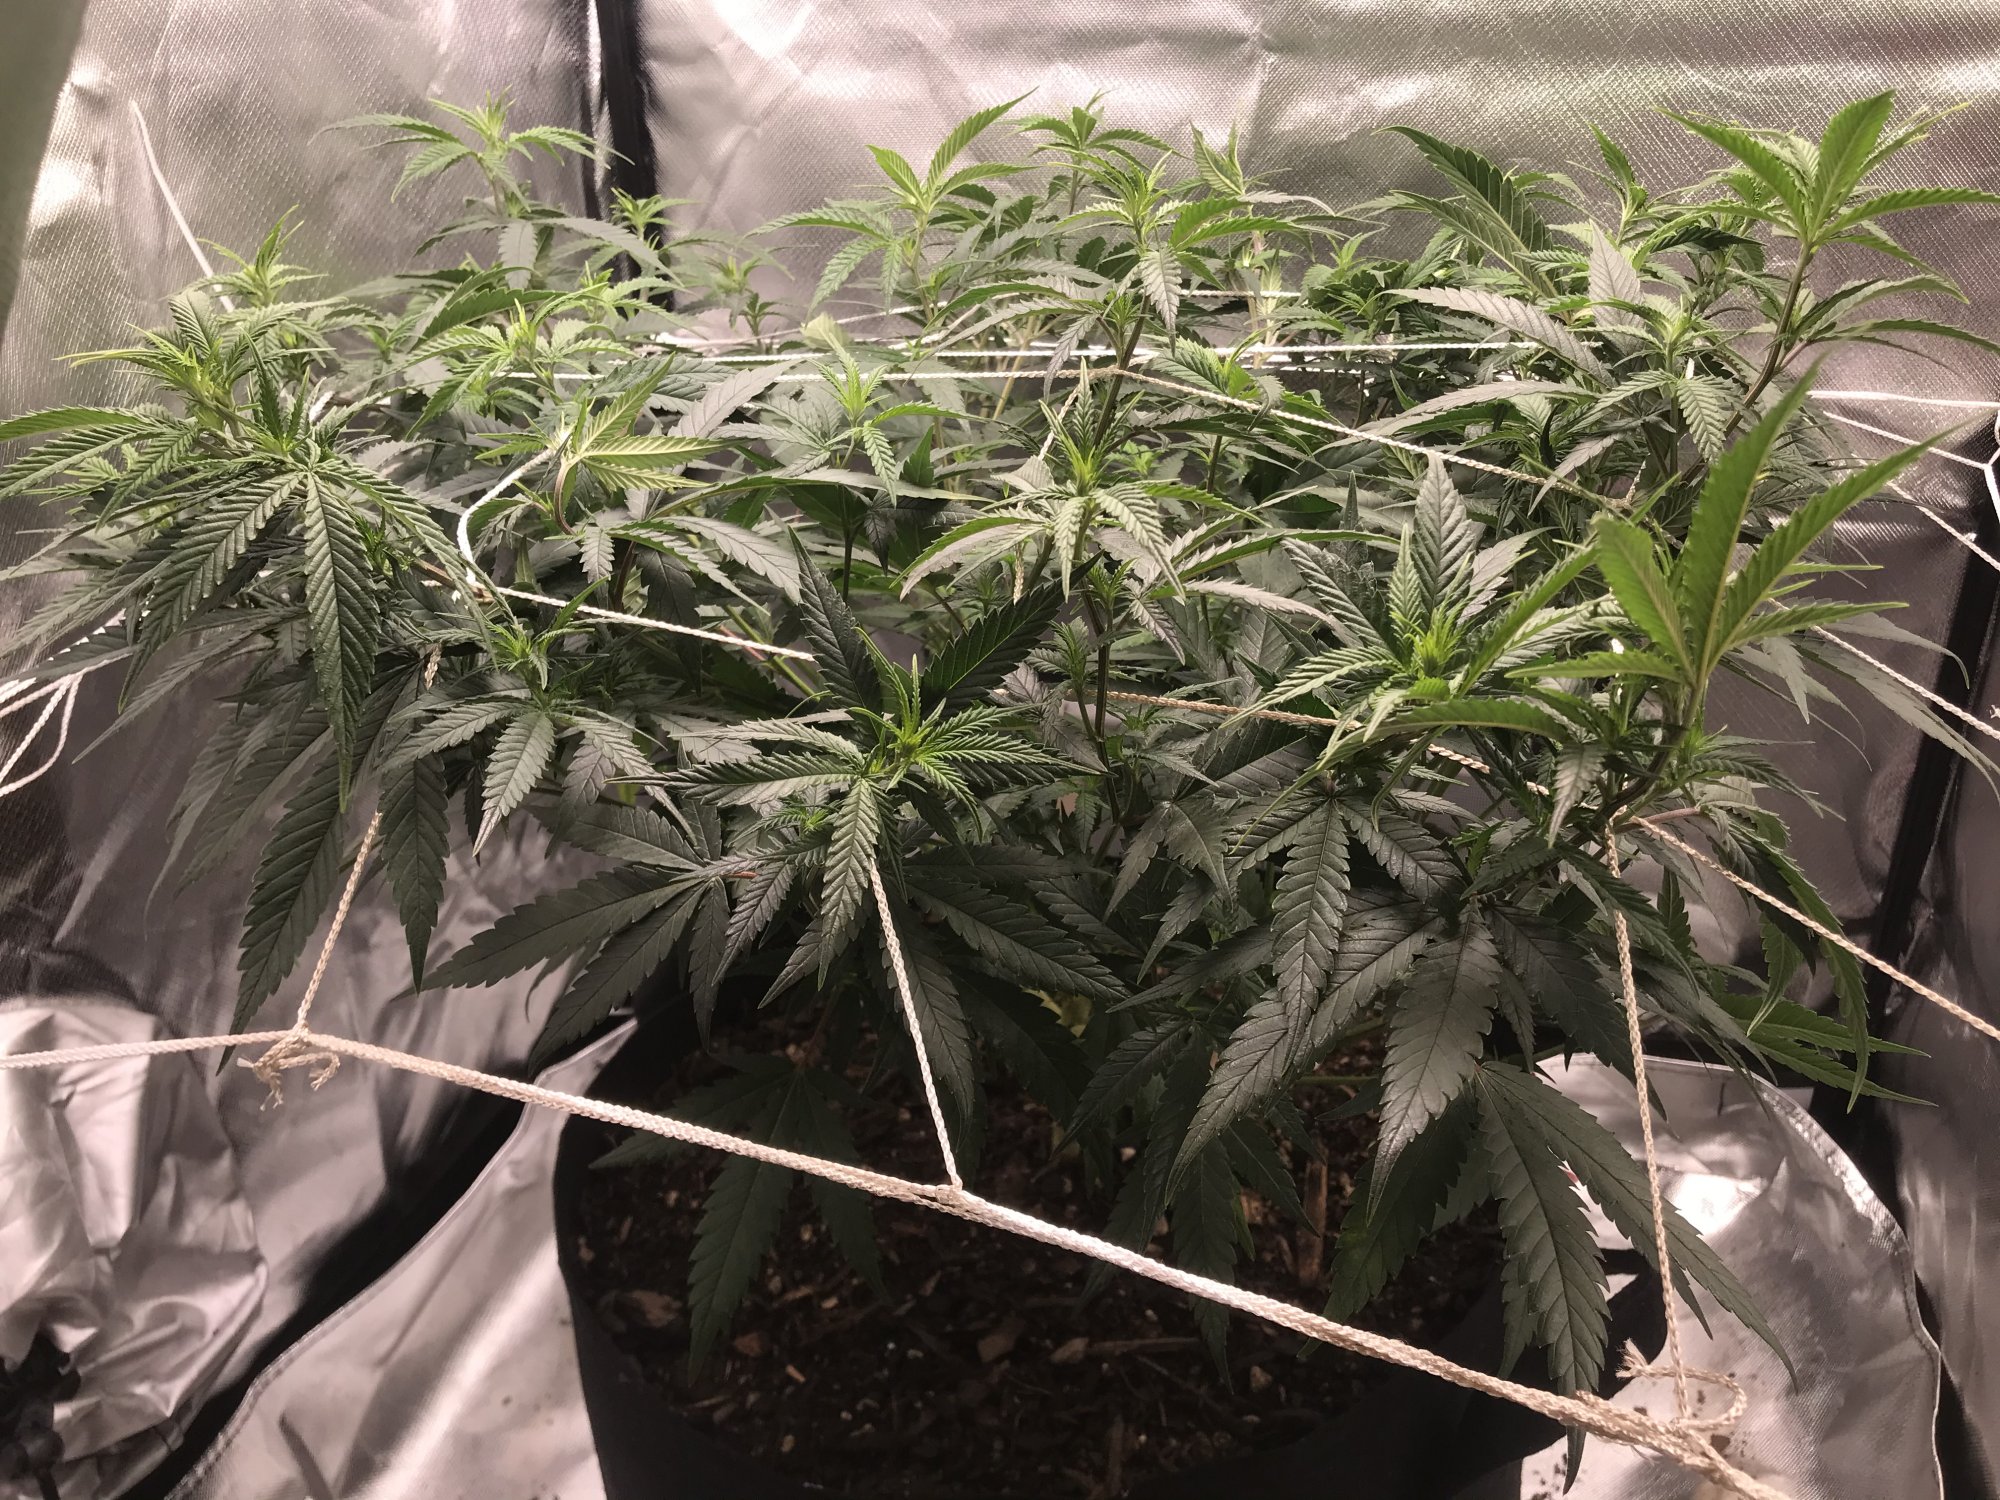 My first crack at indoor grow any advice to maximise yield would be great